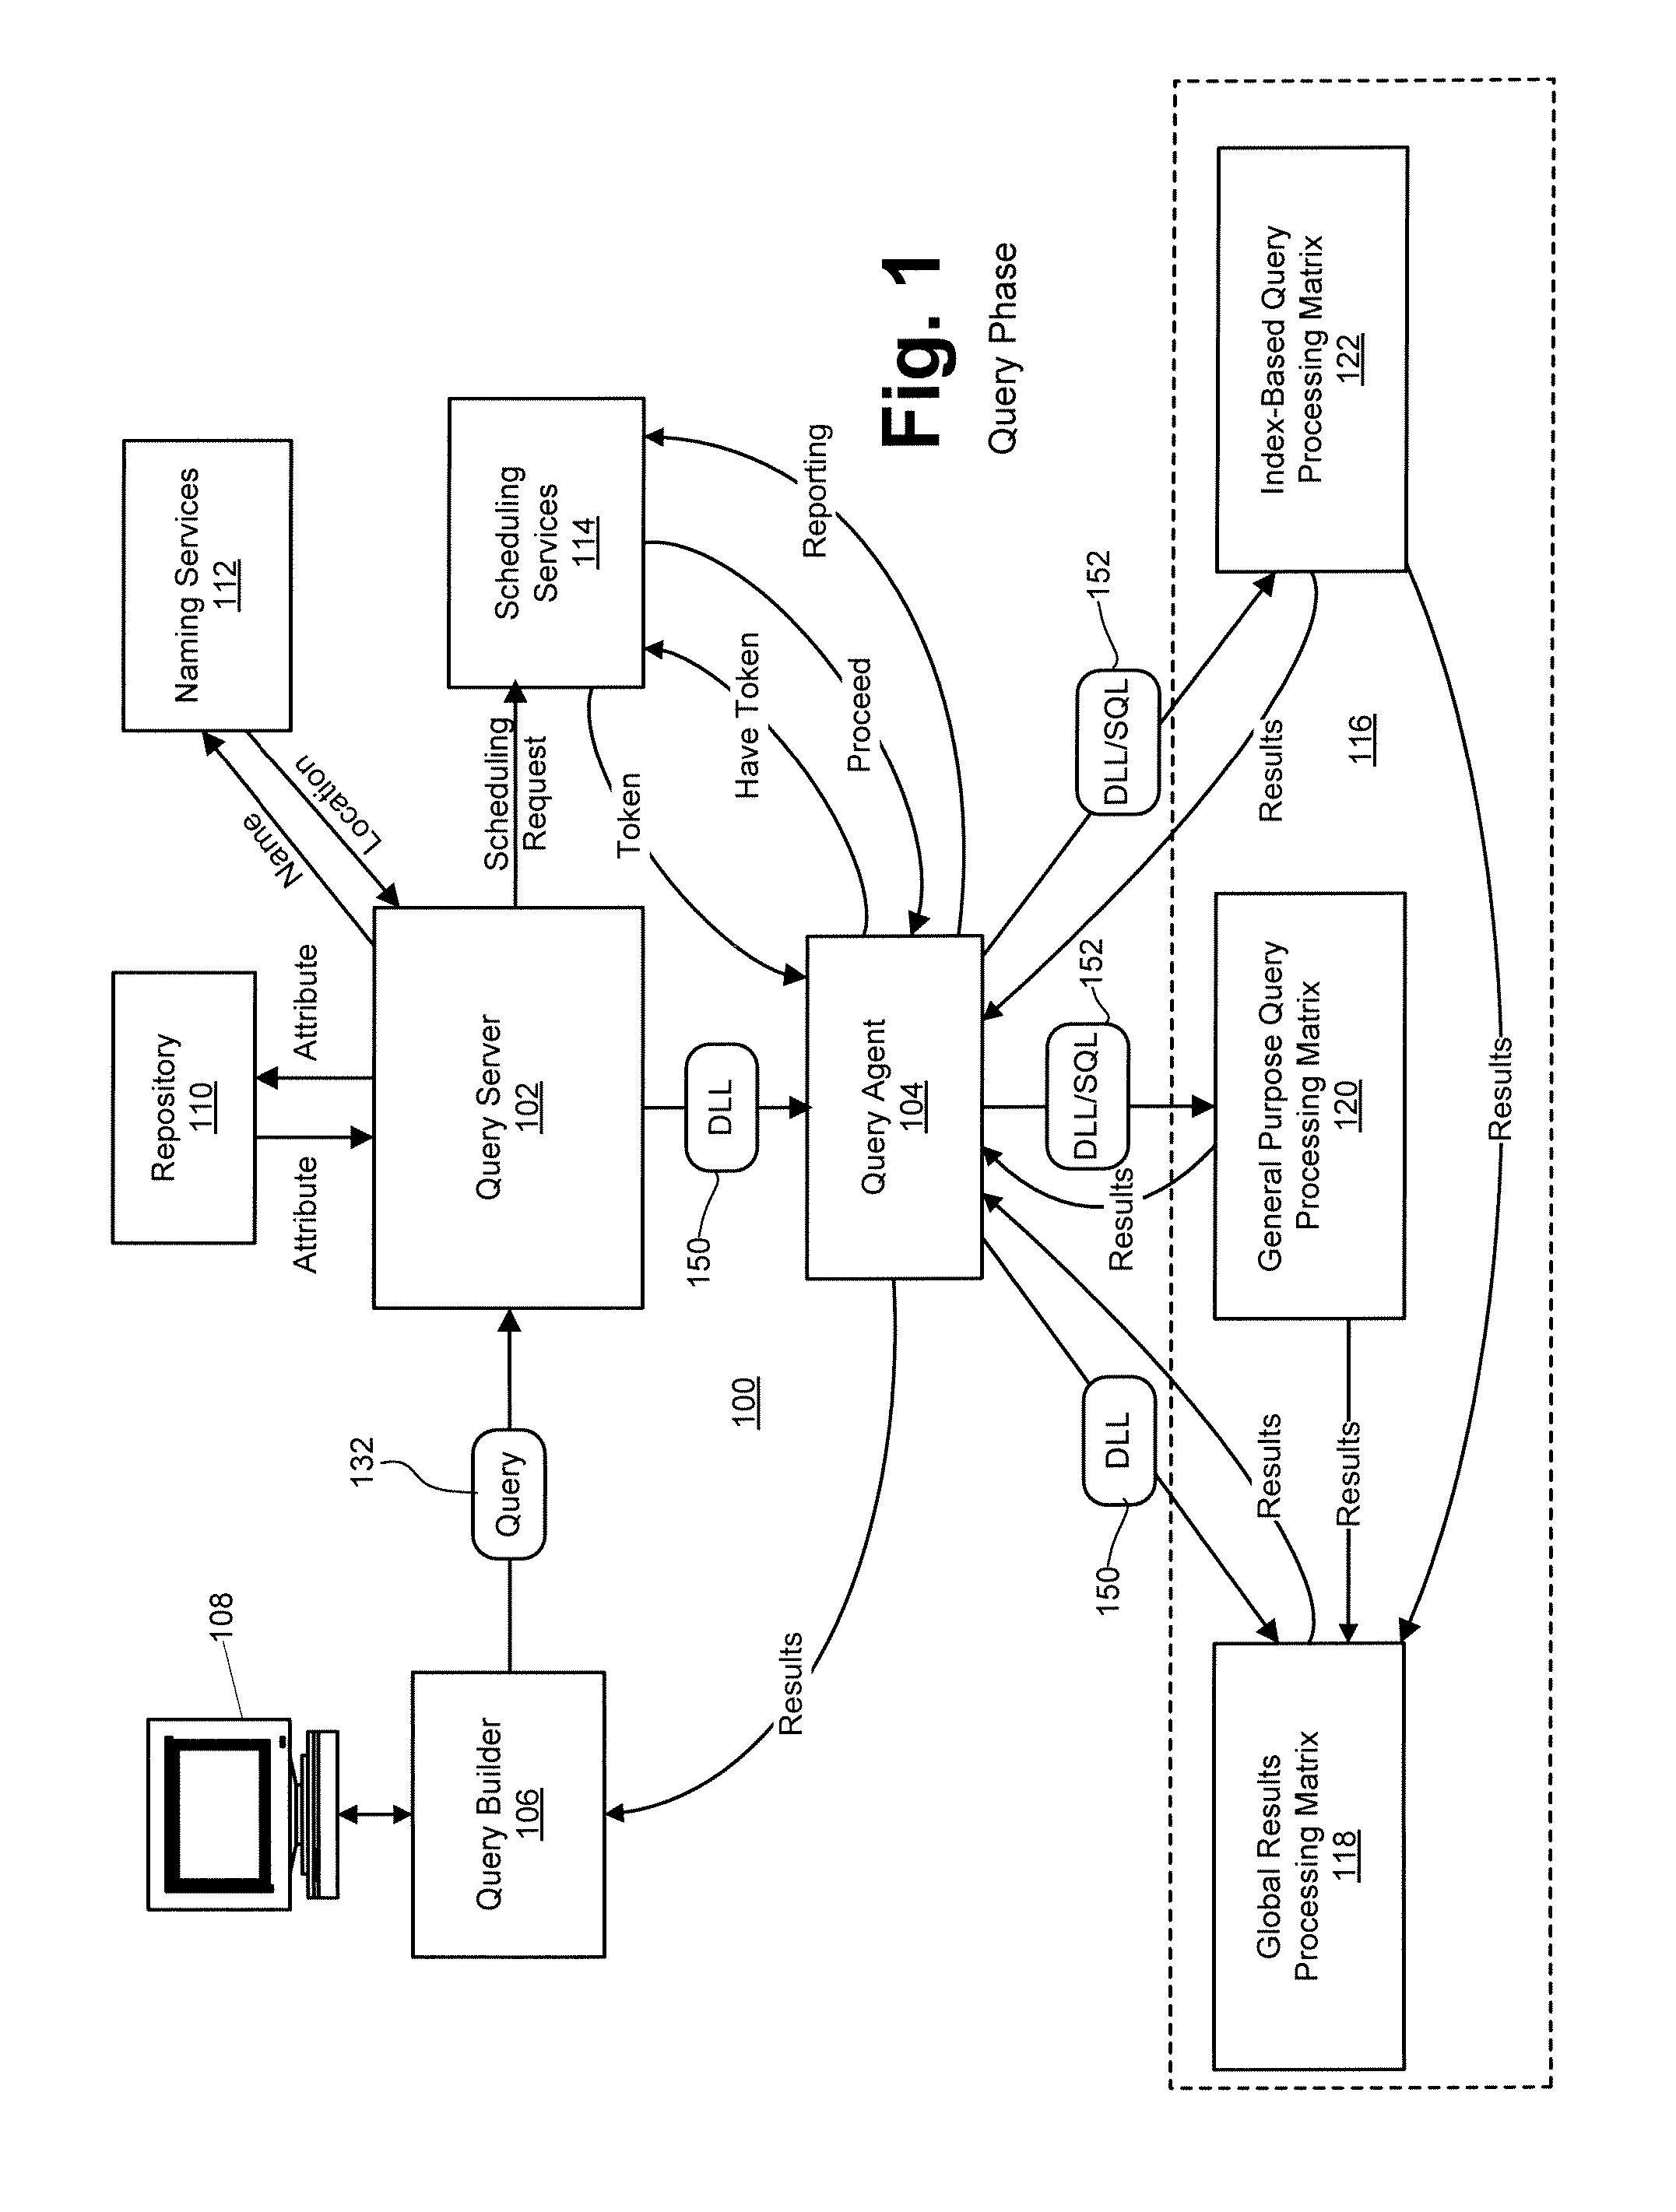 System and method for configuring a parallel-processing database system